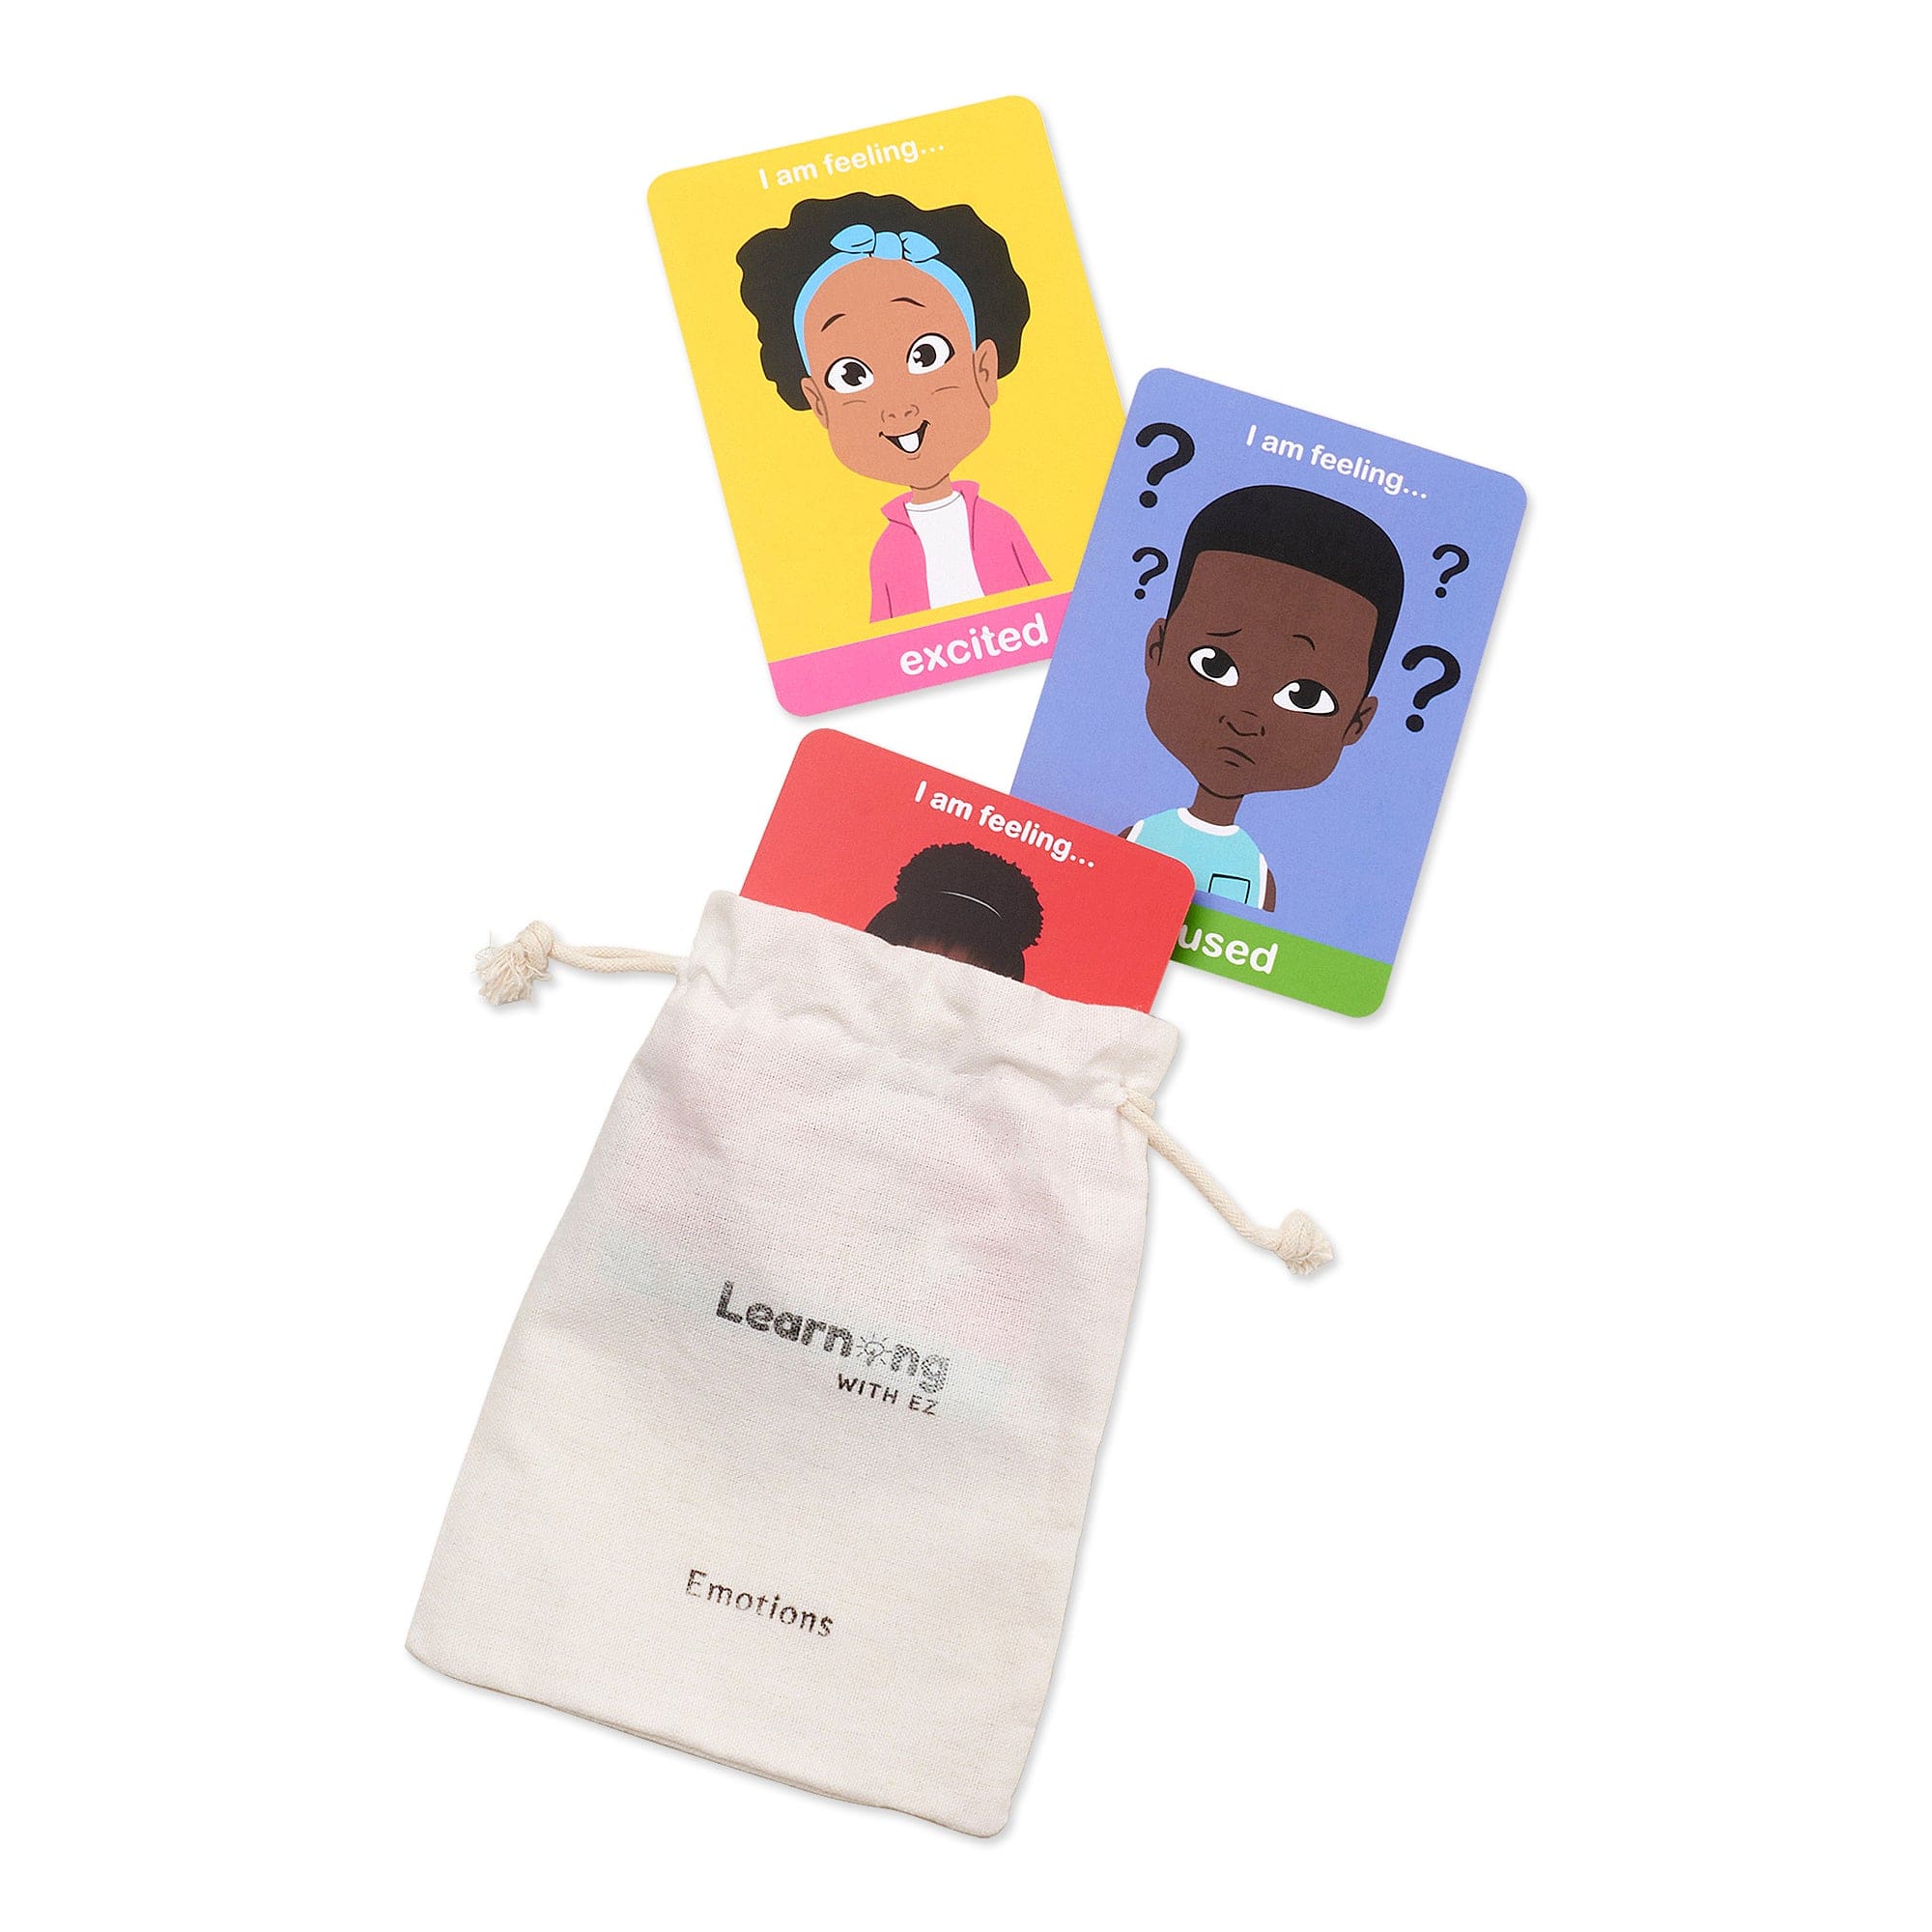 Emotion Flashcards with pouch